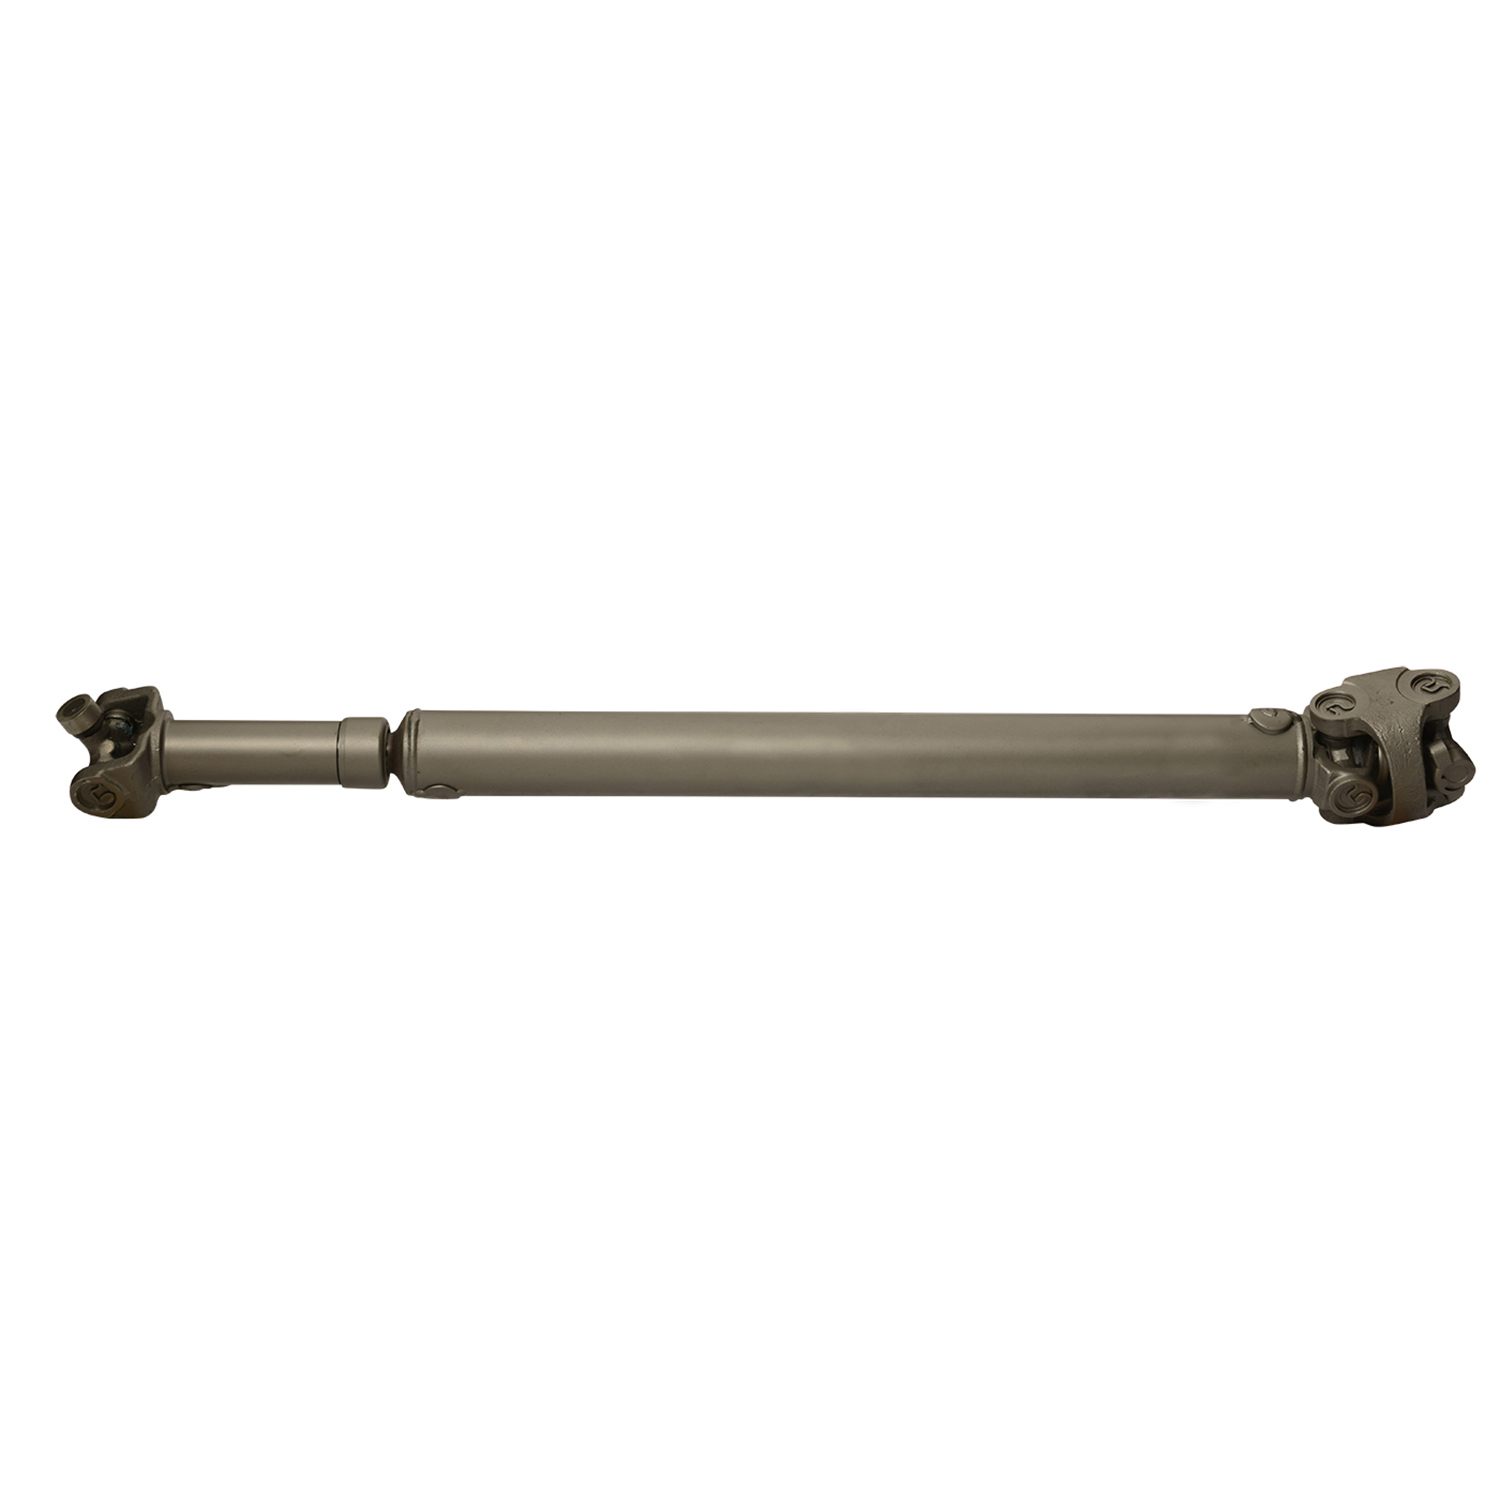 USA Standard ZDS9445 Front Driveshaft, For F150, 35 in. Center-To-Center